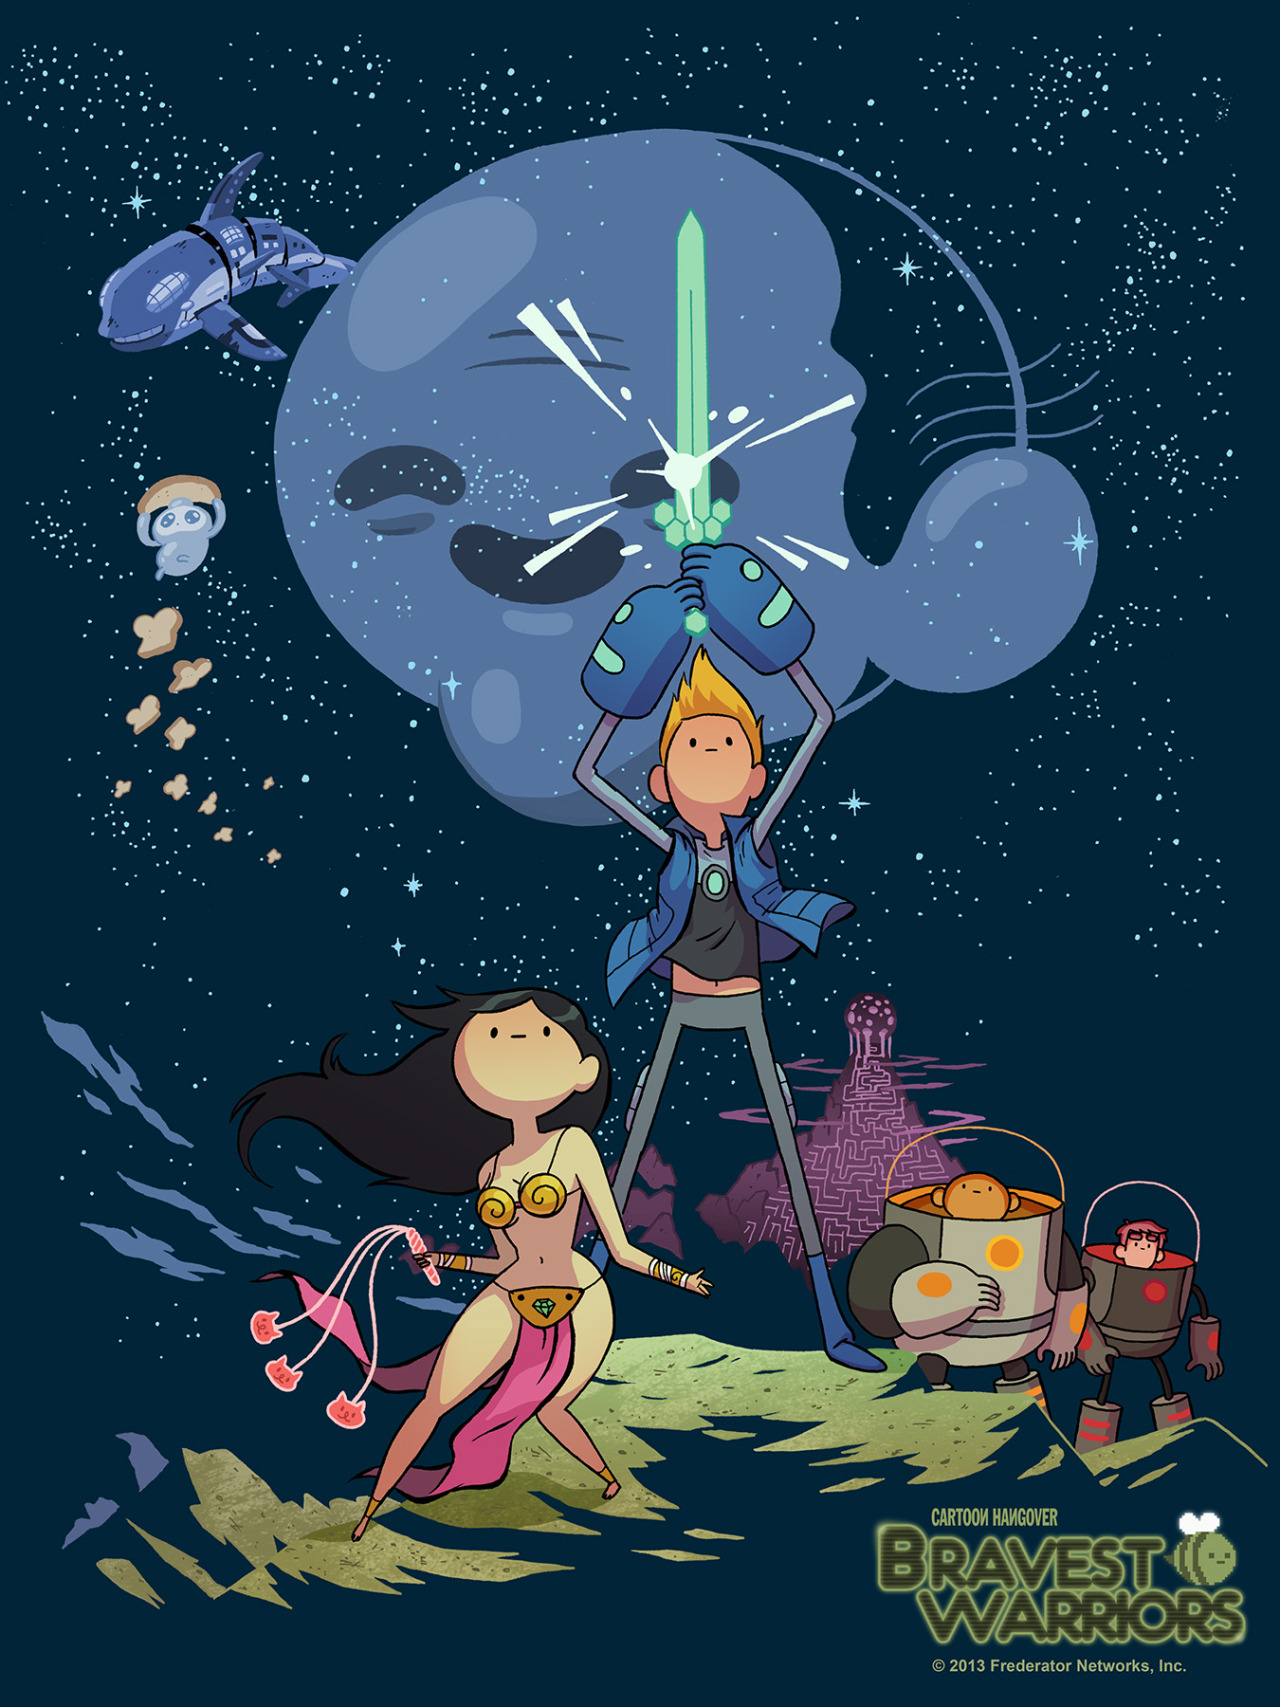 frederator-studios: frederator-studios: Did you hear there’s a new Star Wars movie coming out!!! Or…